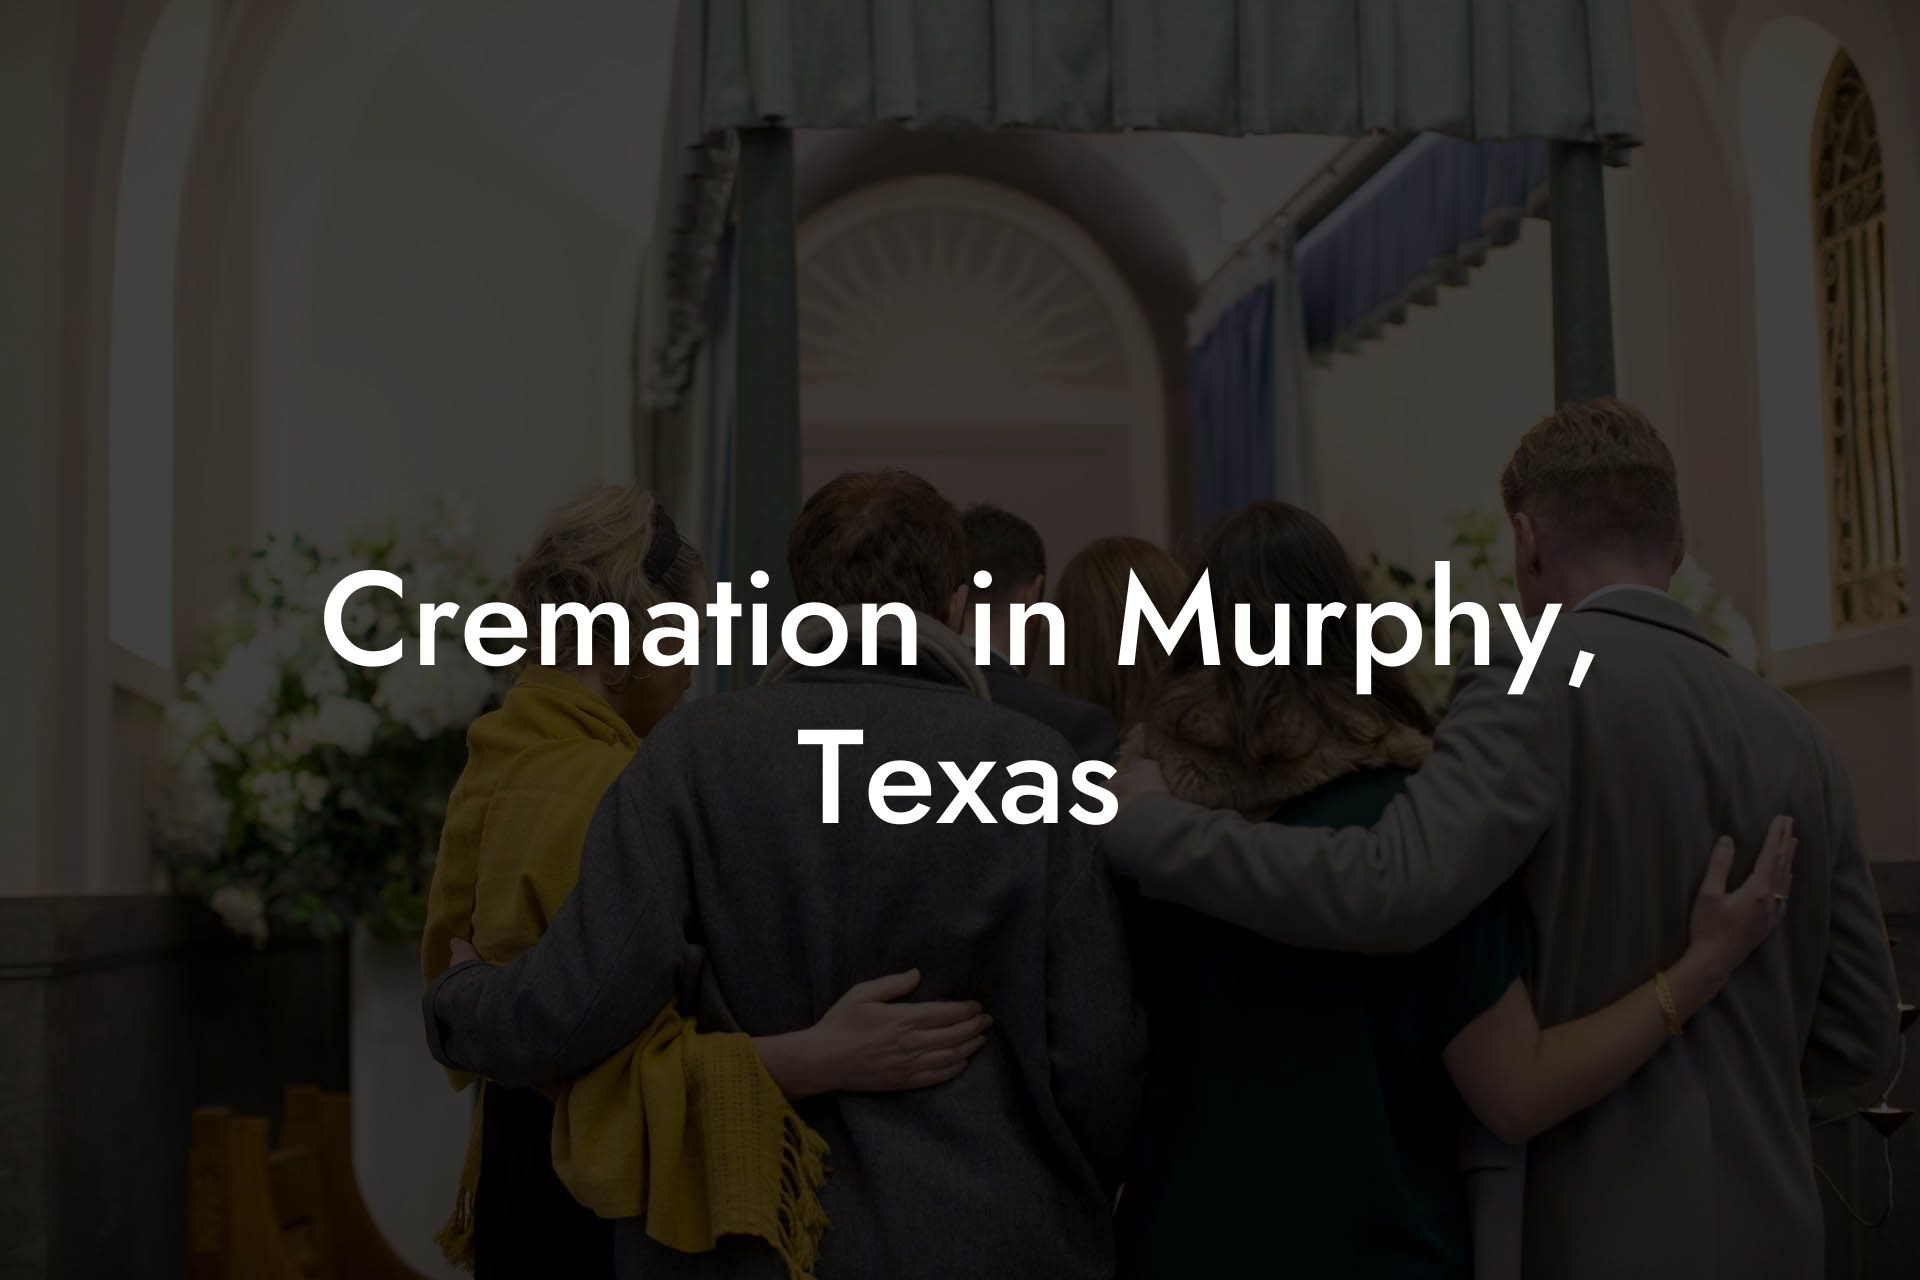 Cremation in Murphy, Texas